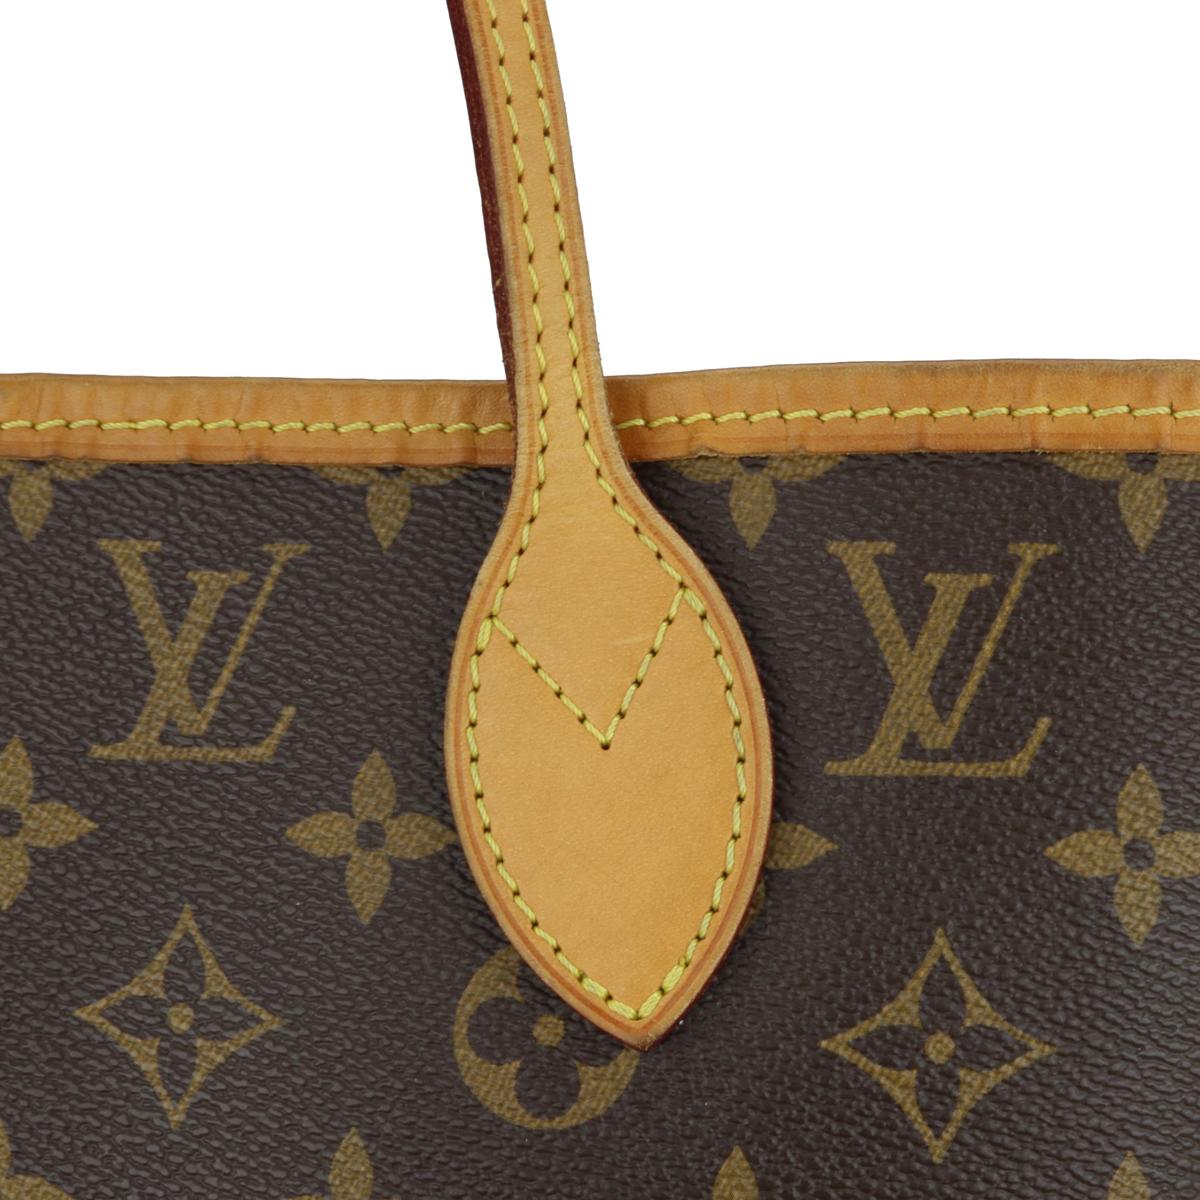 Louis Vuitton Neverfull MM Bag in Monogram with Beige Interior 2014 For Sale 6